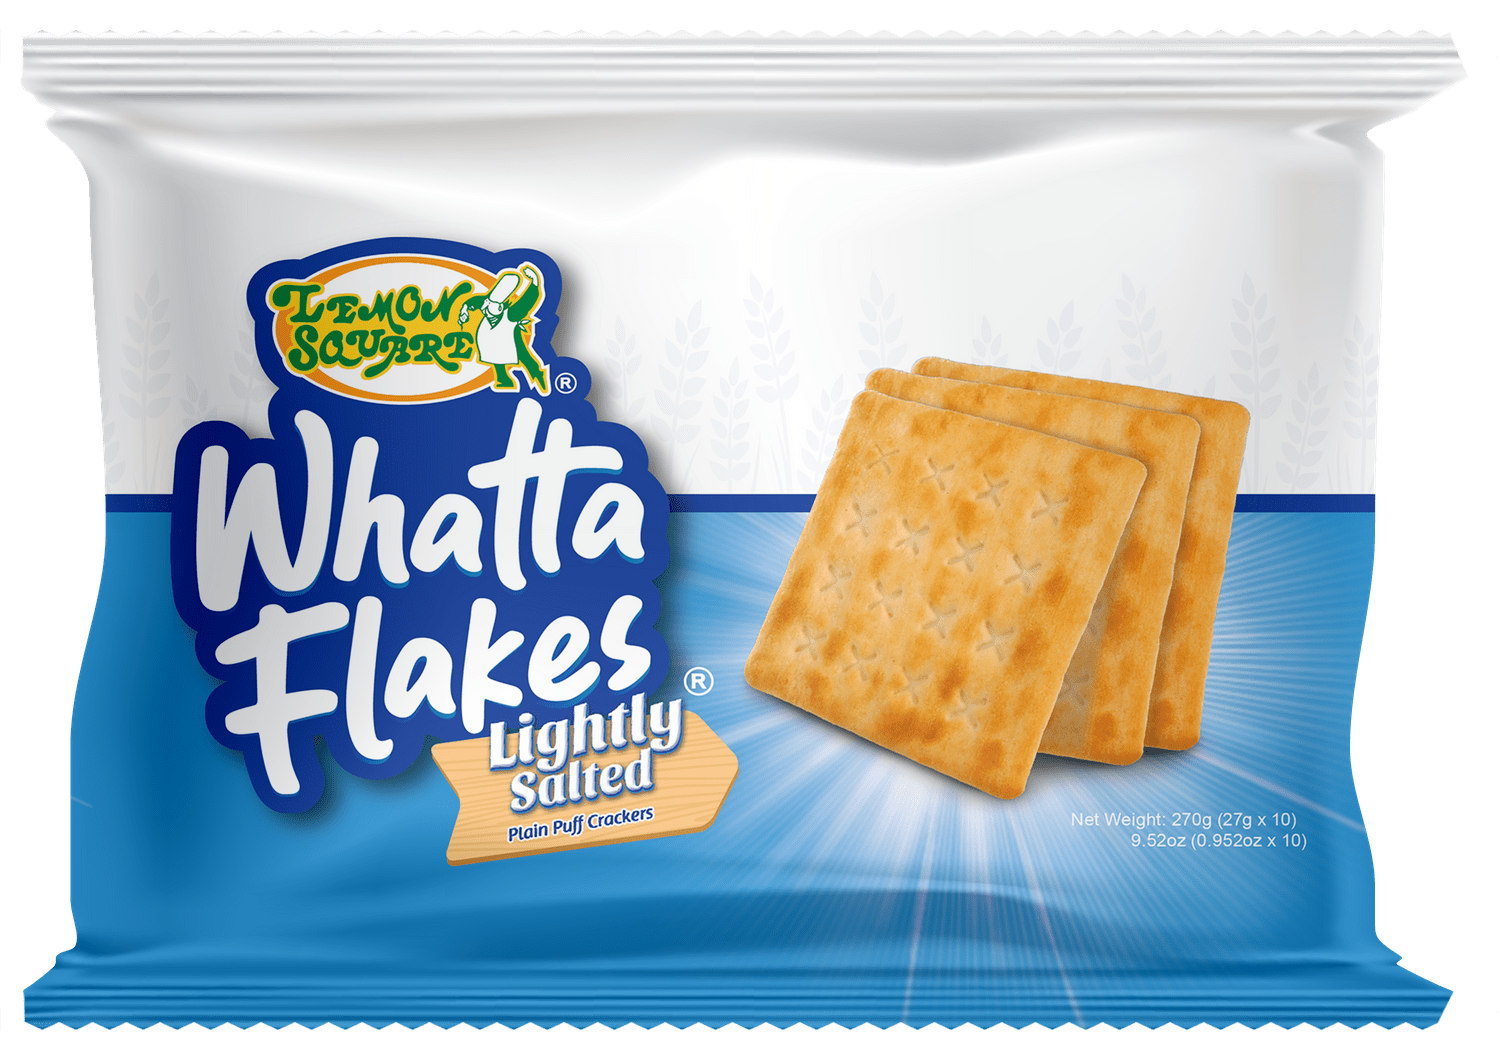 Lemon Square Whatta Flakes Lightly Salted Outer